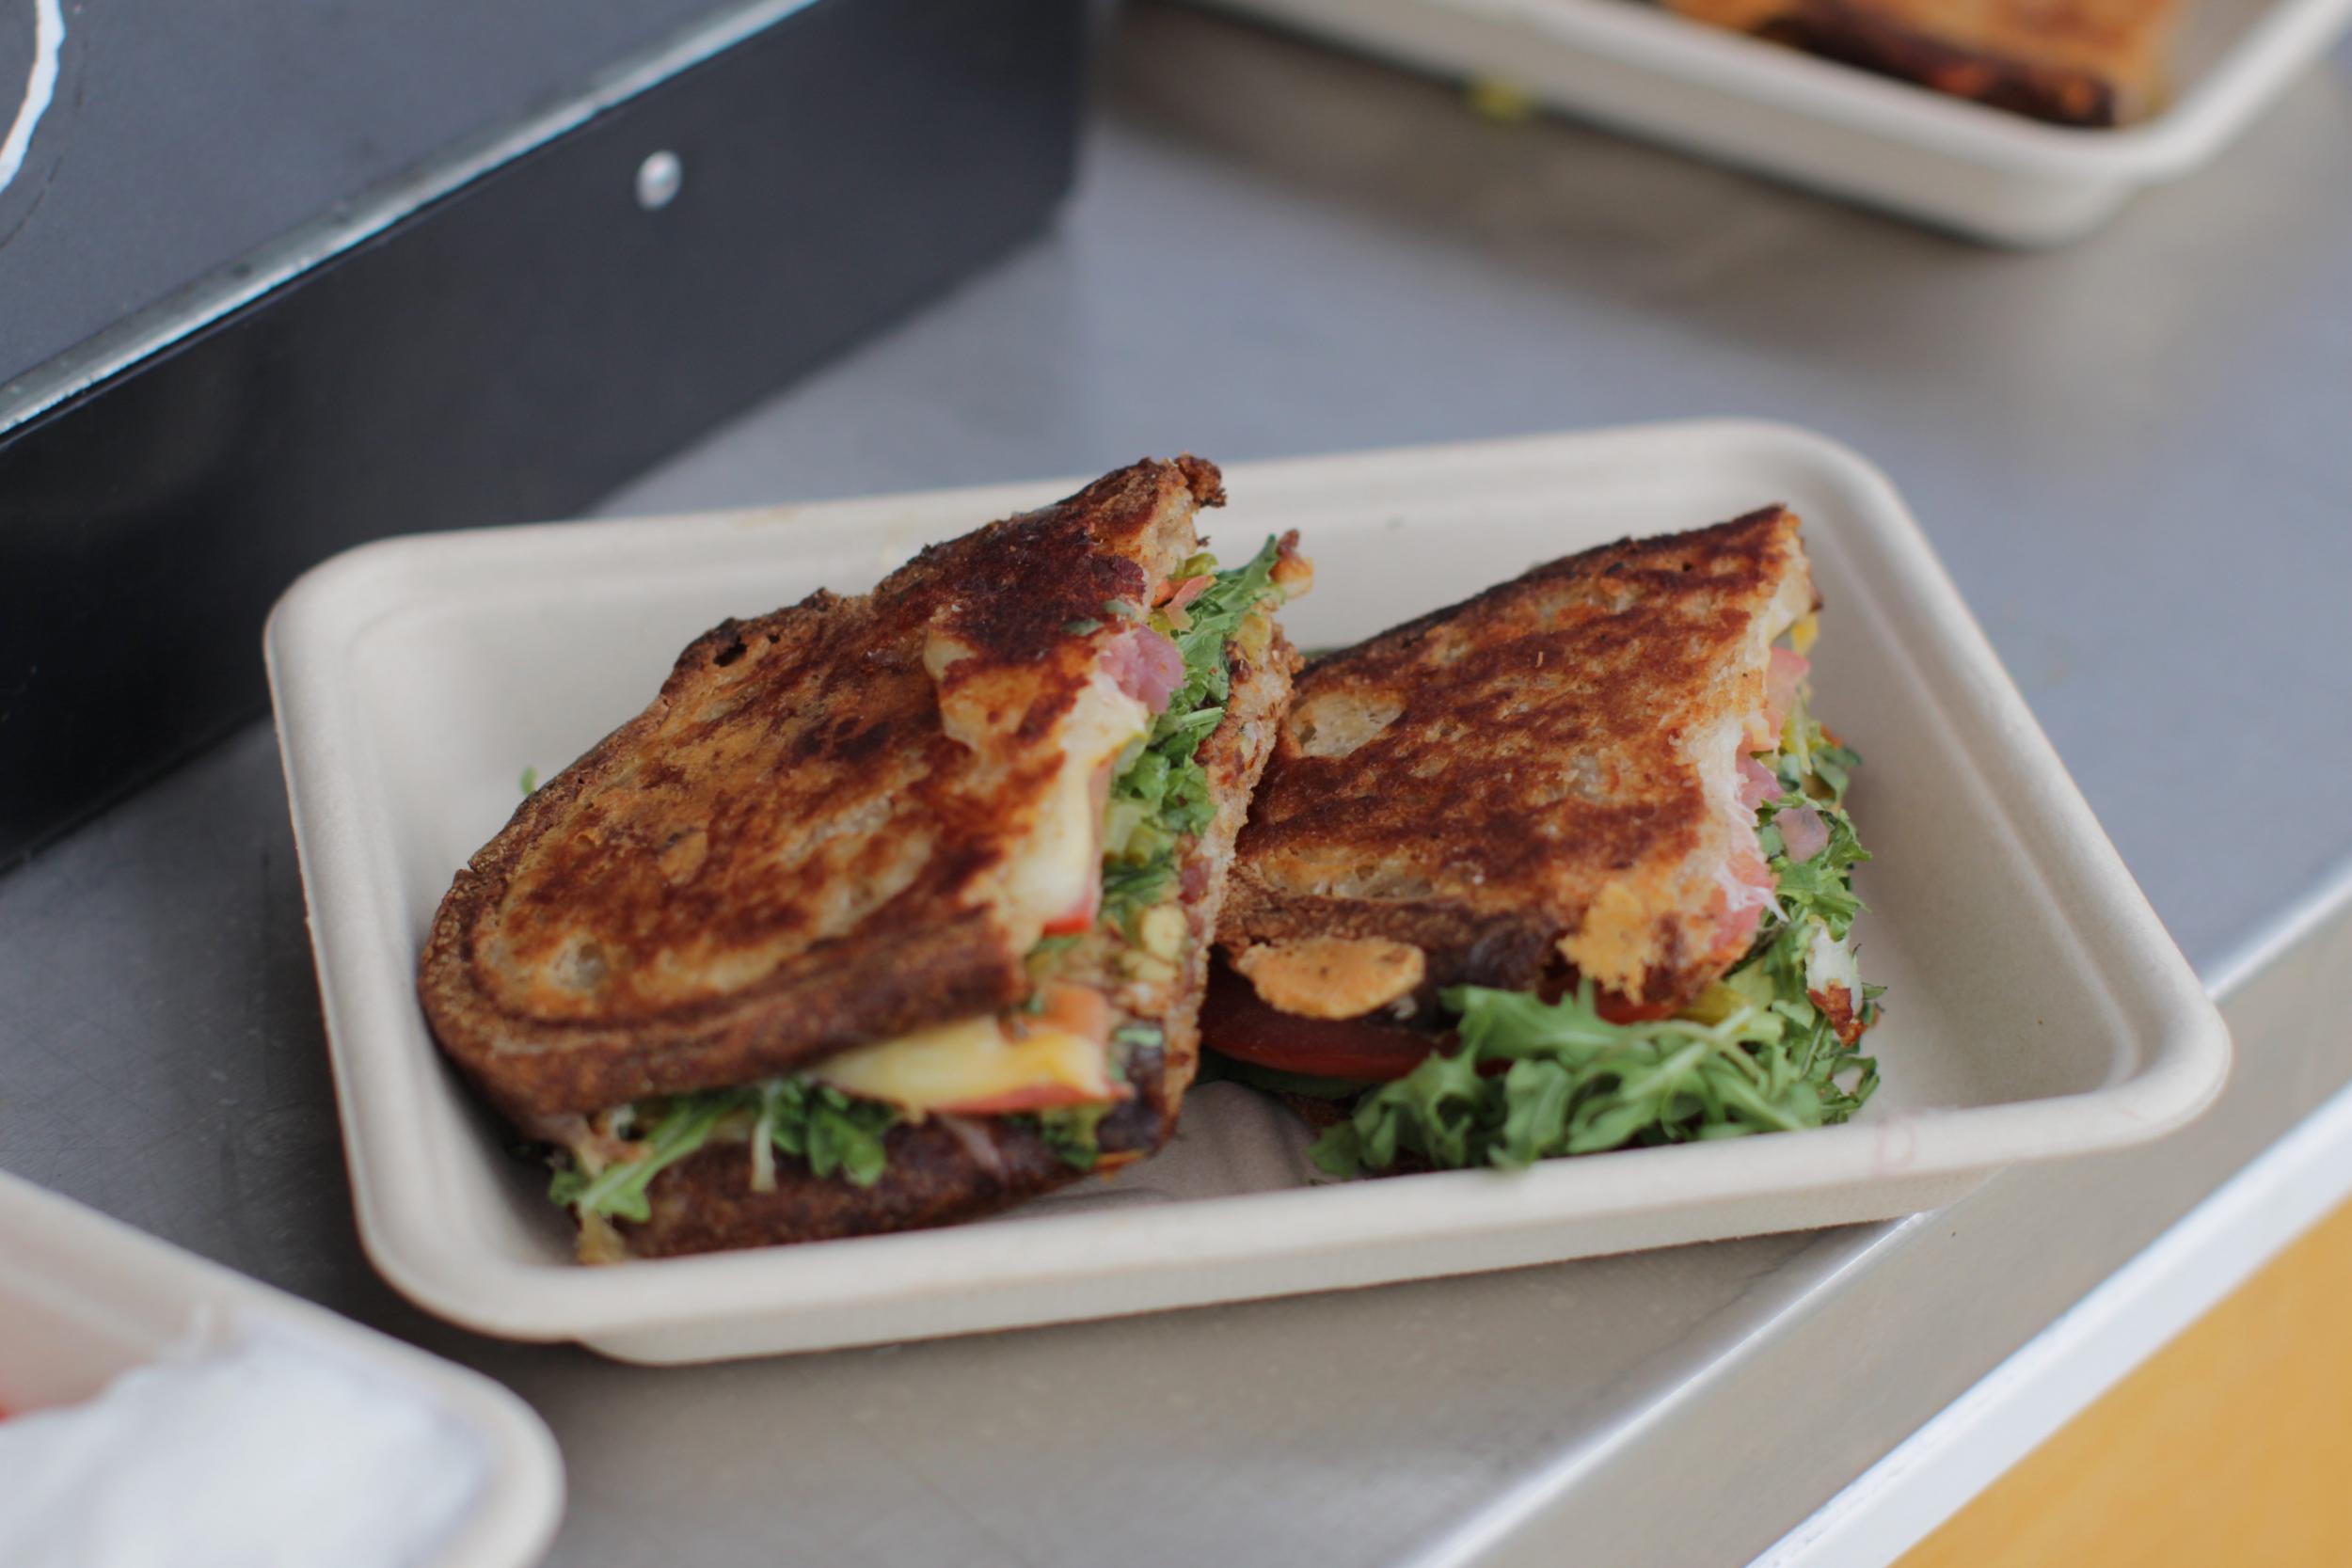 Killer filler: a grilled cheese sandwich from Presidio Picnic